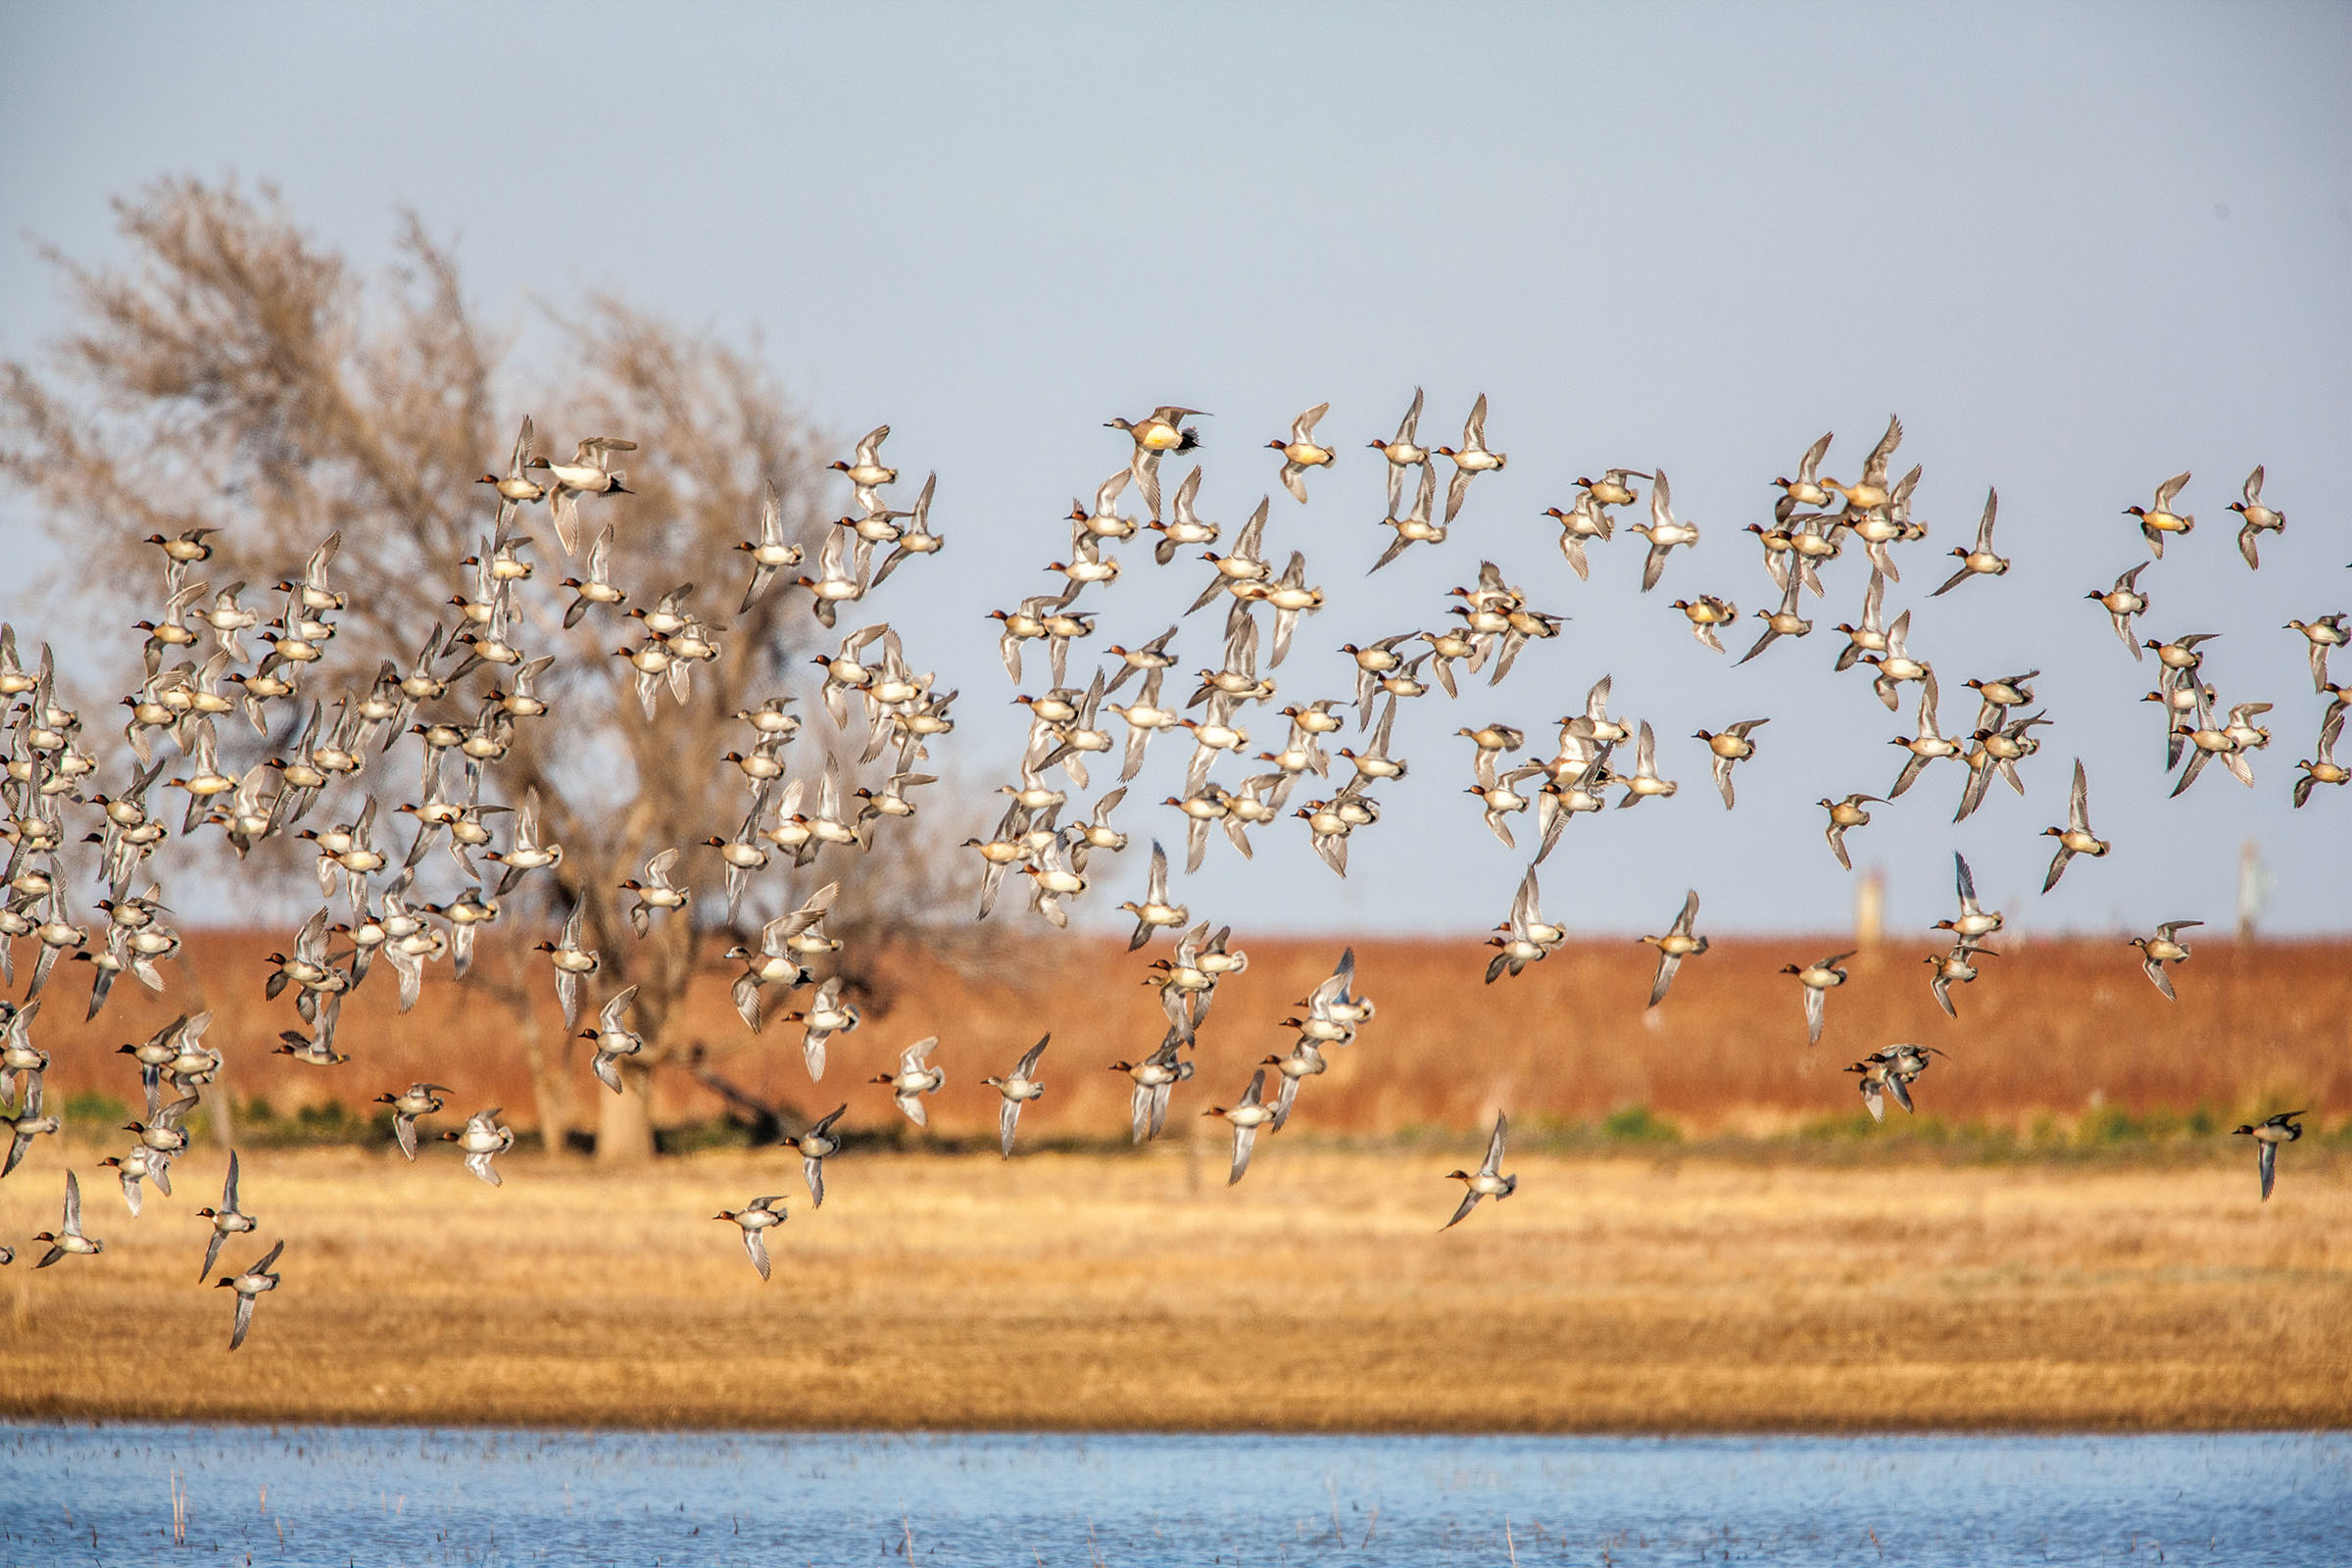 A large flock of birds takes off over blue water next to golden brown land